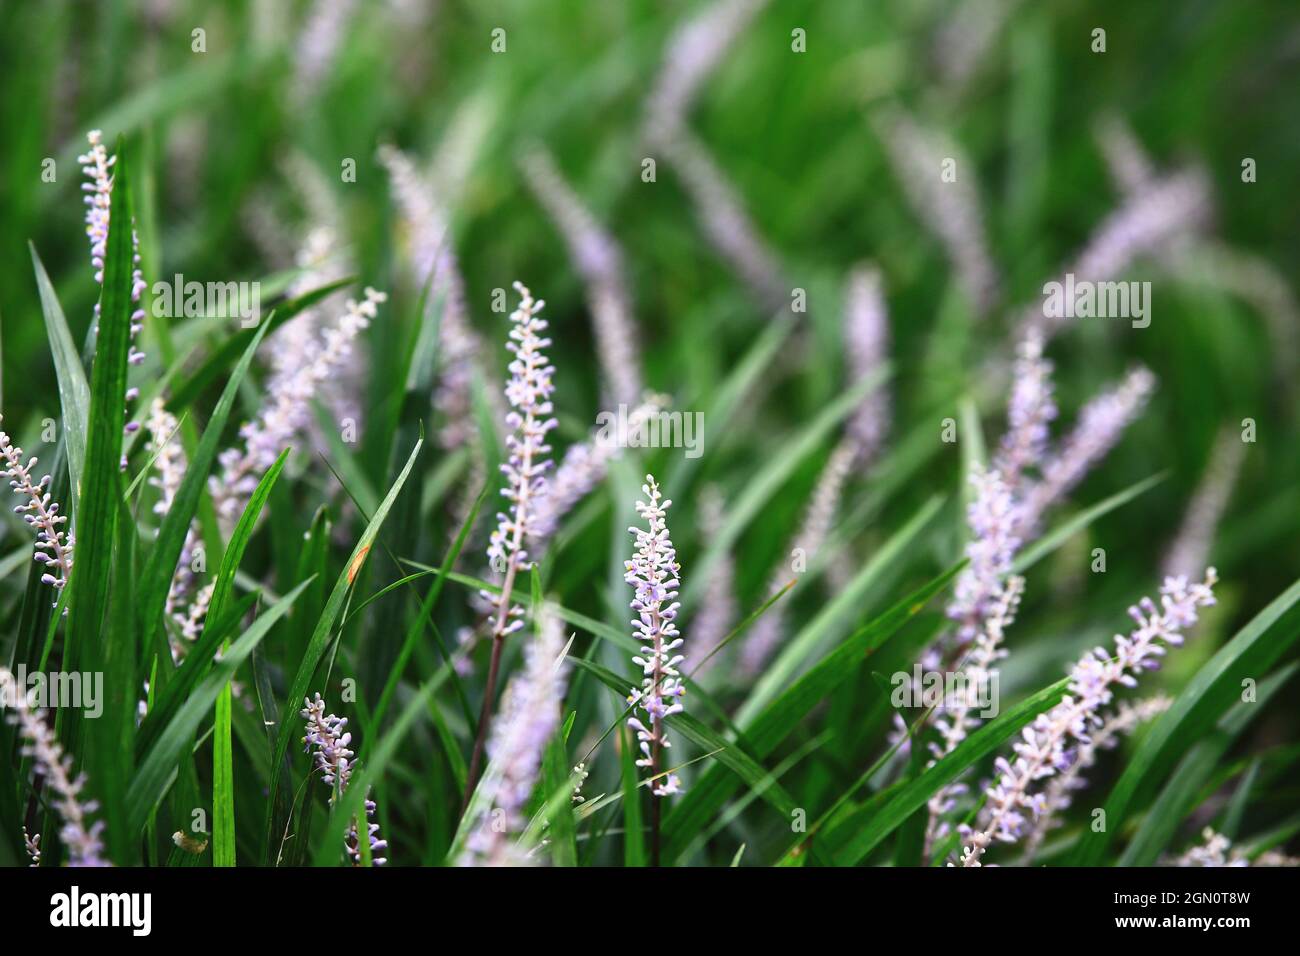 beautiful view of Creeping Liriope(Liriope Muscari) flowers and buds,close-up of purple with white flowers blooming in the garden Stock Photo